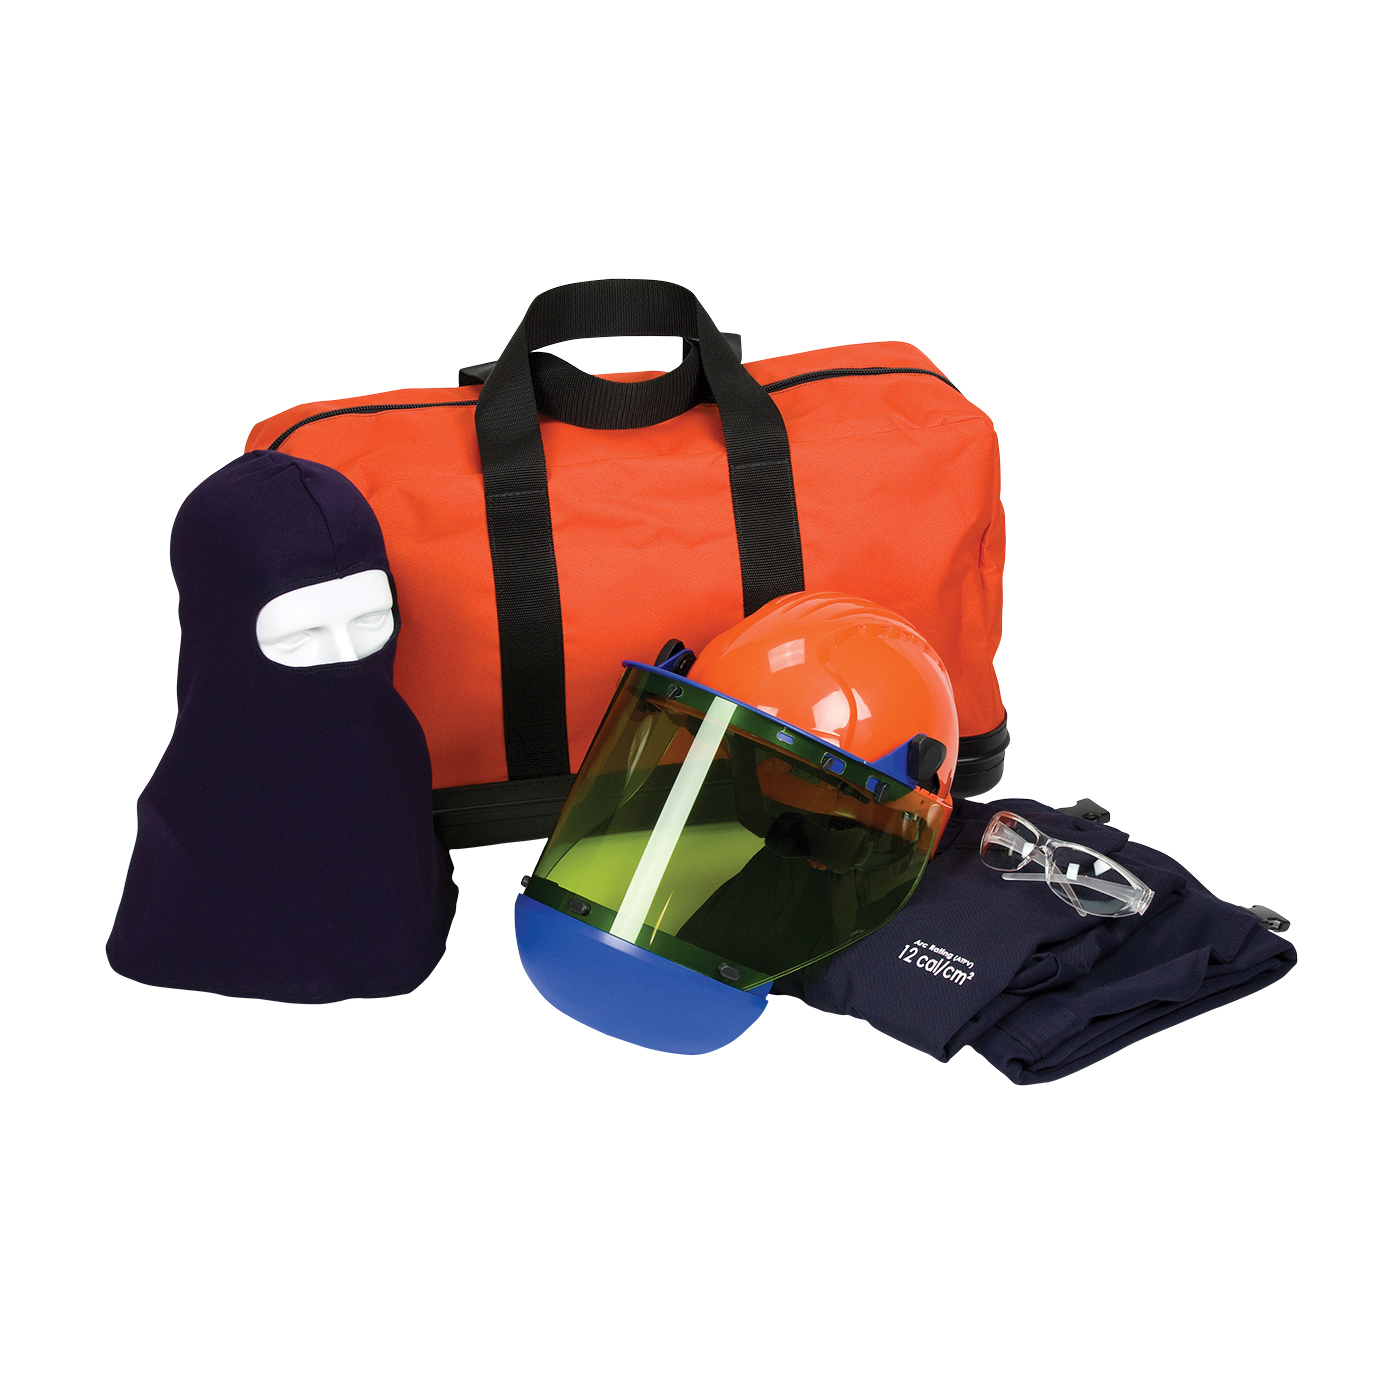 PIP® 9150-52810/2X Arc Flash Kit, Hazard Risk Category (HRC): 2, Hood/Face Shield Max Arc Flash Protection: 12 cal/sq-cm, Garment Max Arc Flash Protection: 12 cal/sq-cm, Specifications Met: NFPA 70E-2018, Arc Shield/Hard Hat Head/Face Protection